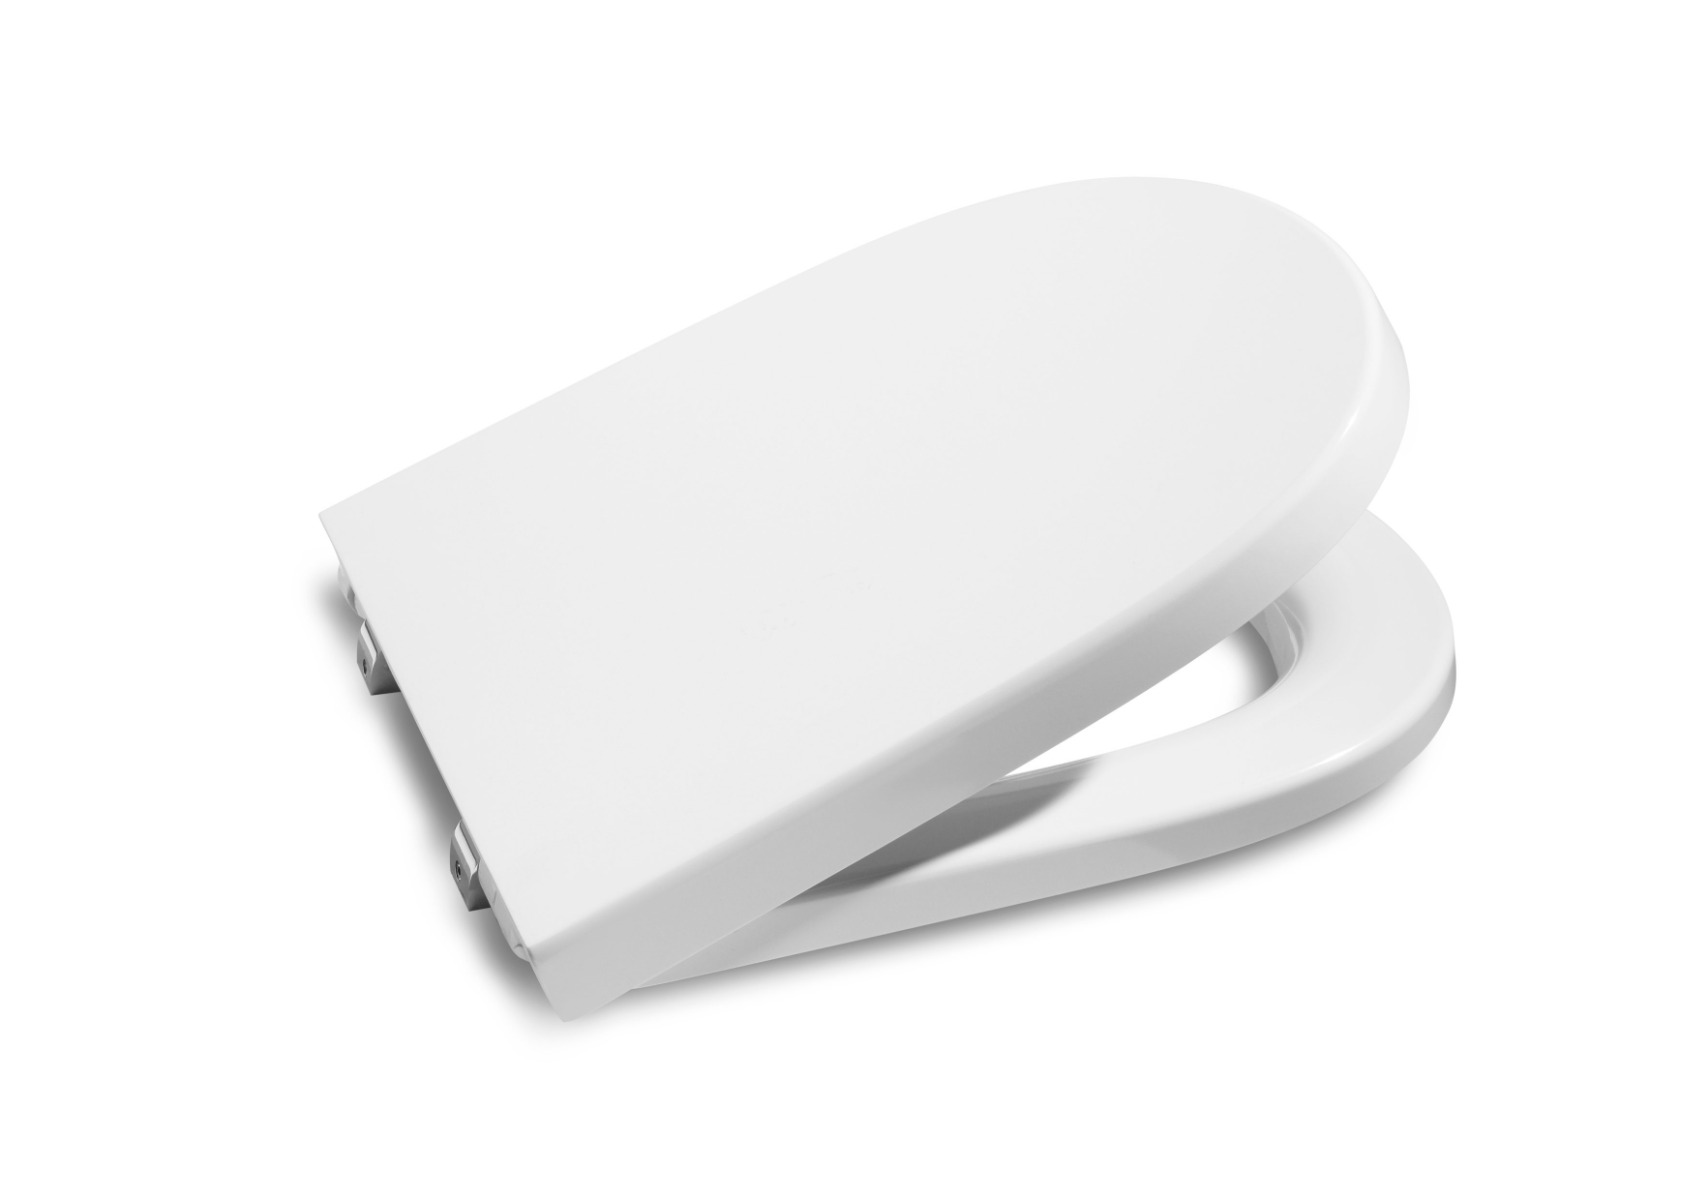 SQUARE - Soft-closing SUPRALIT toilet seat and cover